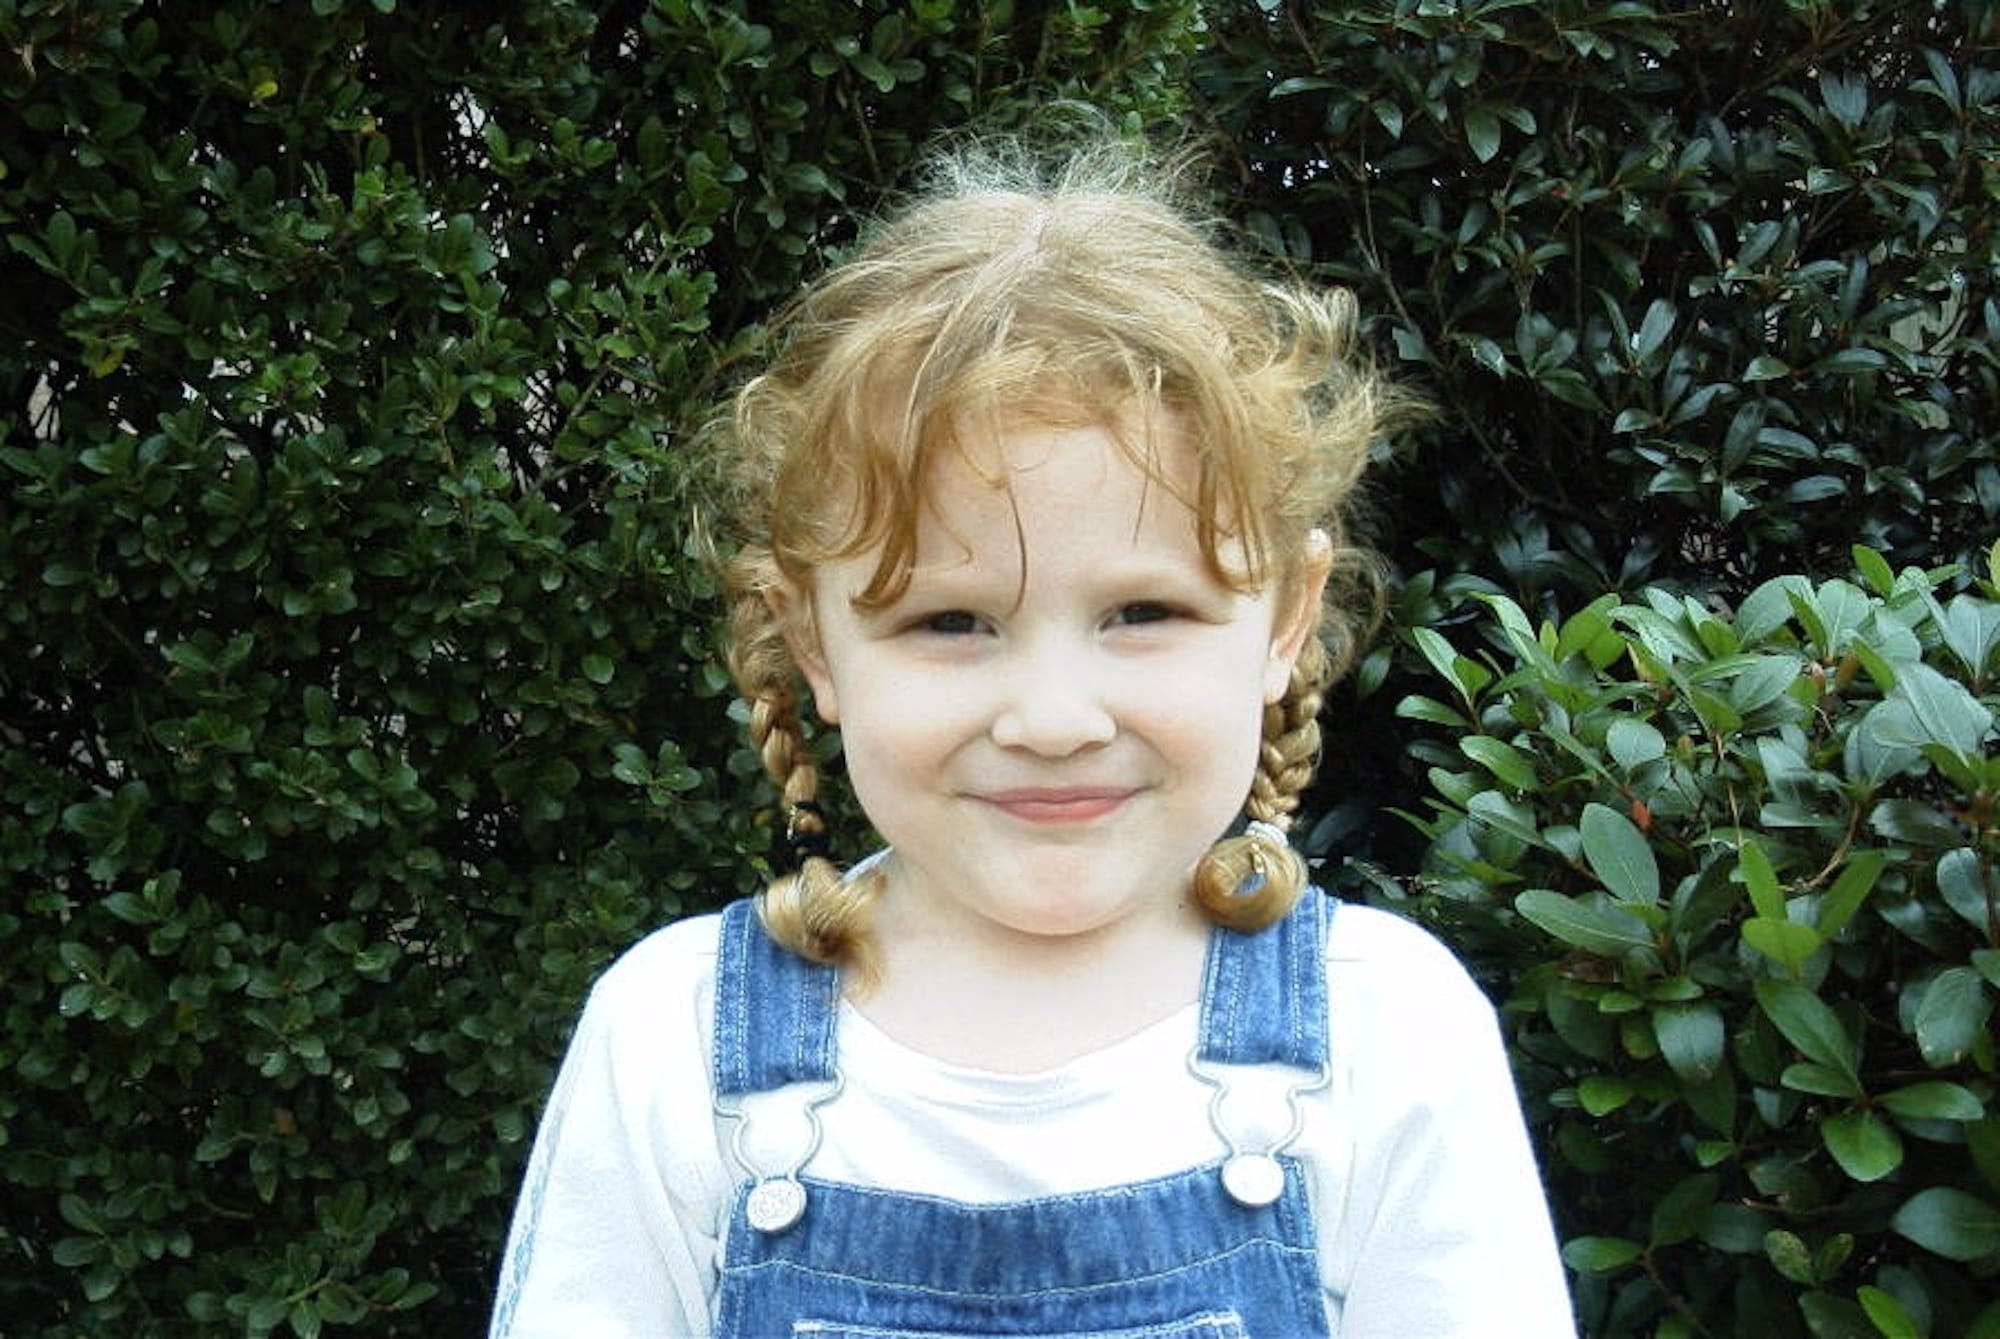 Child, Girl, Pigtails, Braids, Overalls, cute, grin, sweet